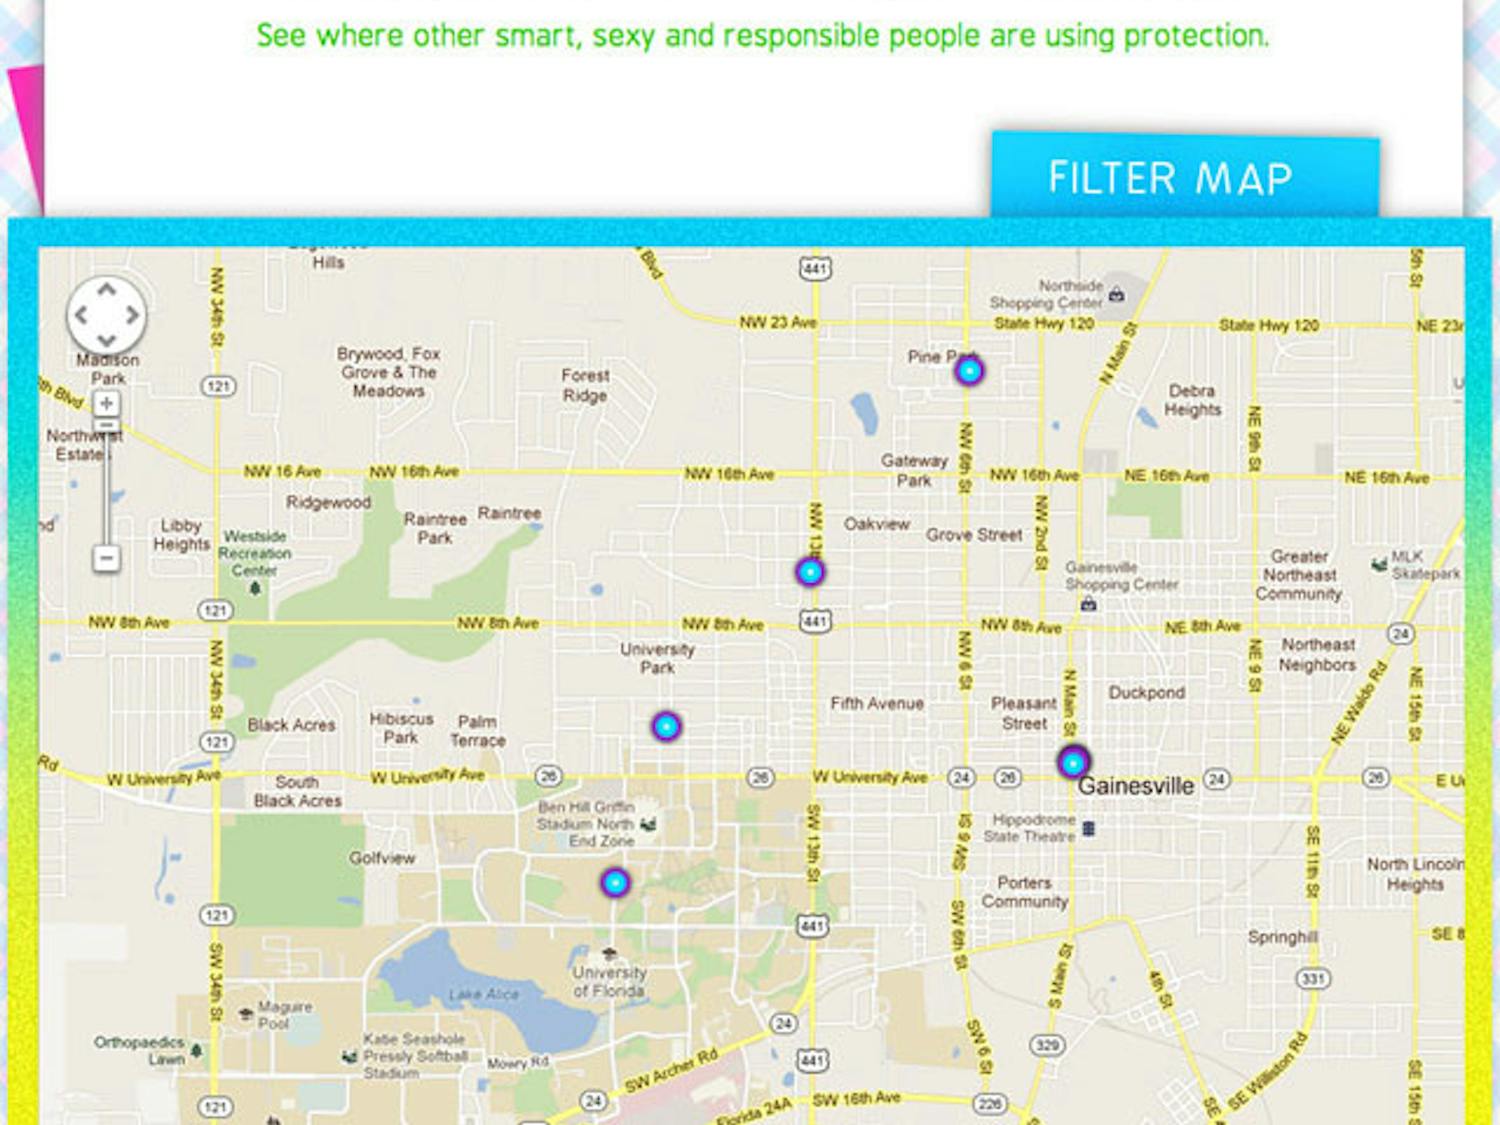 The above map shows the safe-sex check-ins for the Gainesville area as of Thursday night.